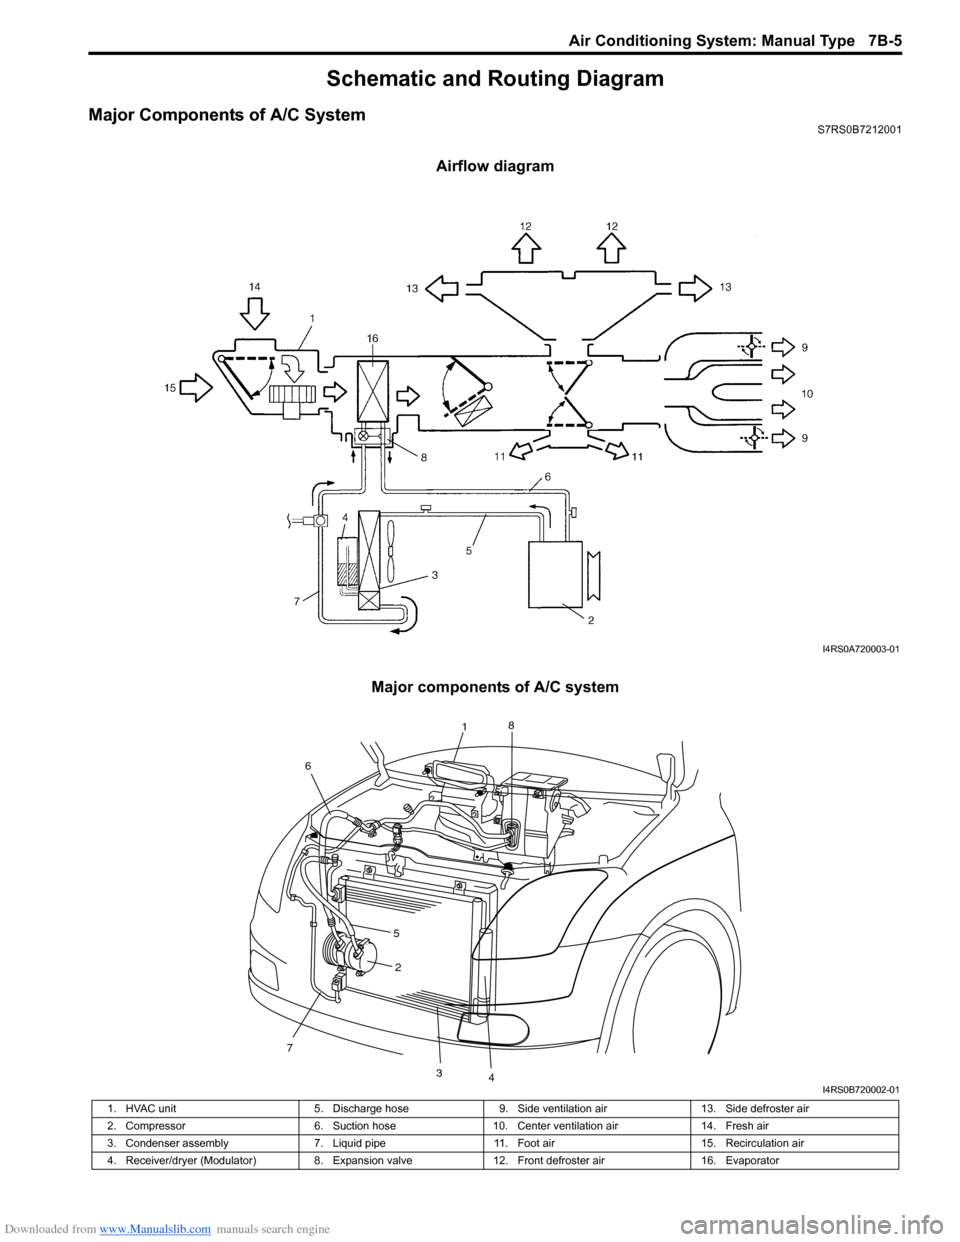 SUZUKI SWIFT 2006 2.G Service Workshop Manual Downloaded from www.Manualslib.com manuals search engine Air Conditioning System: Manual Type 7B-5
Schematic and Routing Diagram
Major Components of A/C SystemS7RS0B7212001
Airflow diagram
Major compo